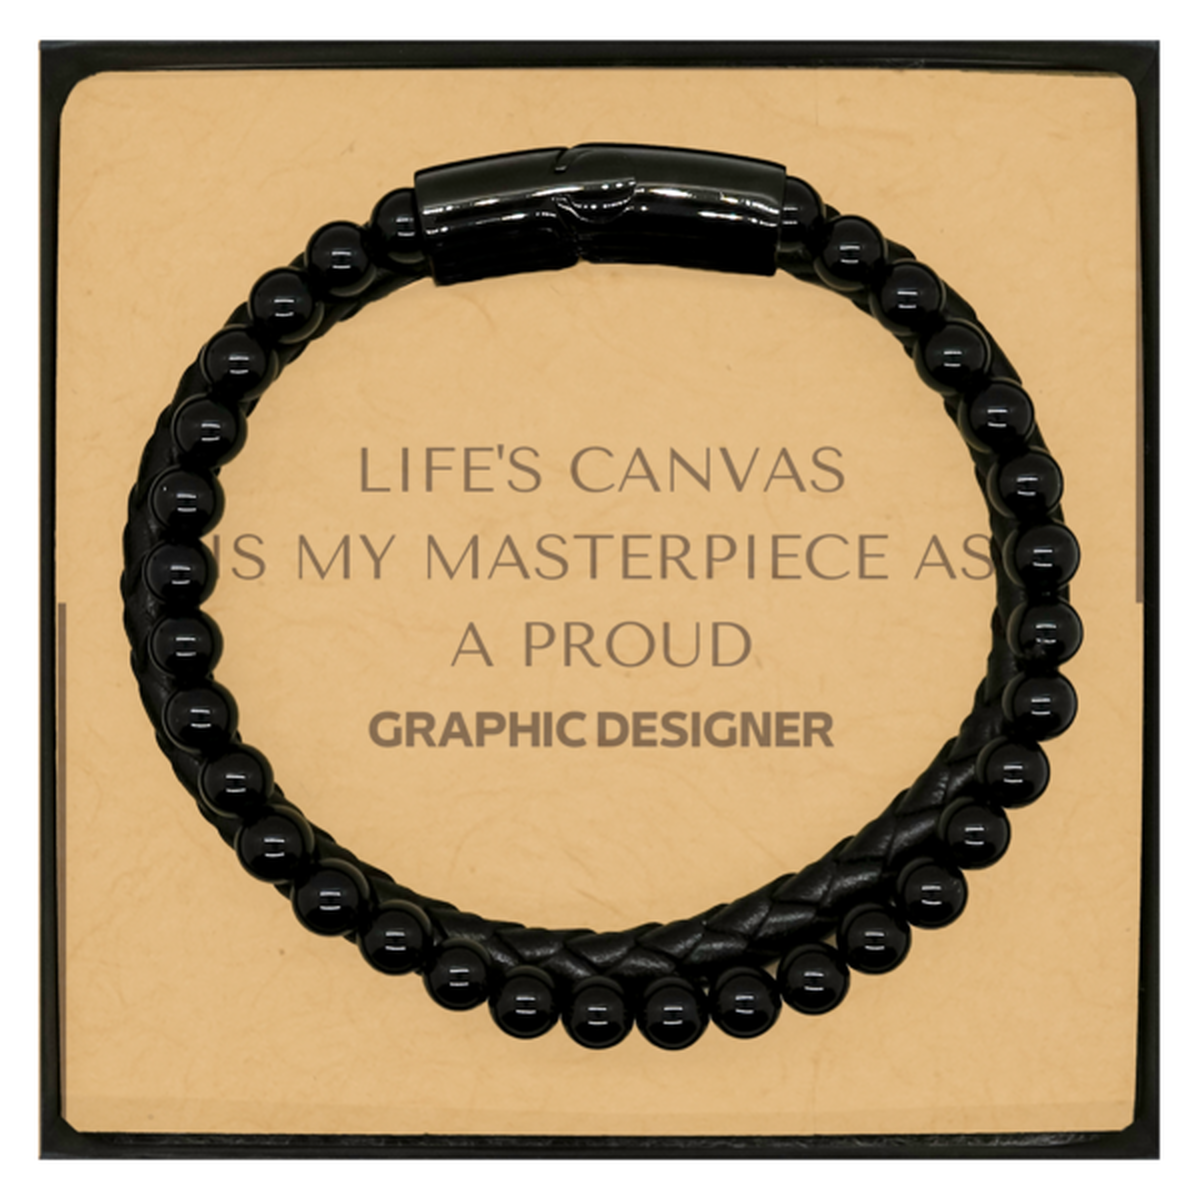 Proud Graphic Designer Gifts, Life's canvas is my masterpiece, Epic Birthday Christmas Unique Stone Leather Bracelets For Graphic Designer, Coworkers, Men, Women, Friends